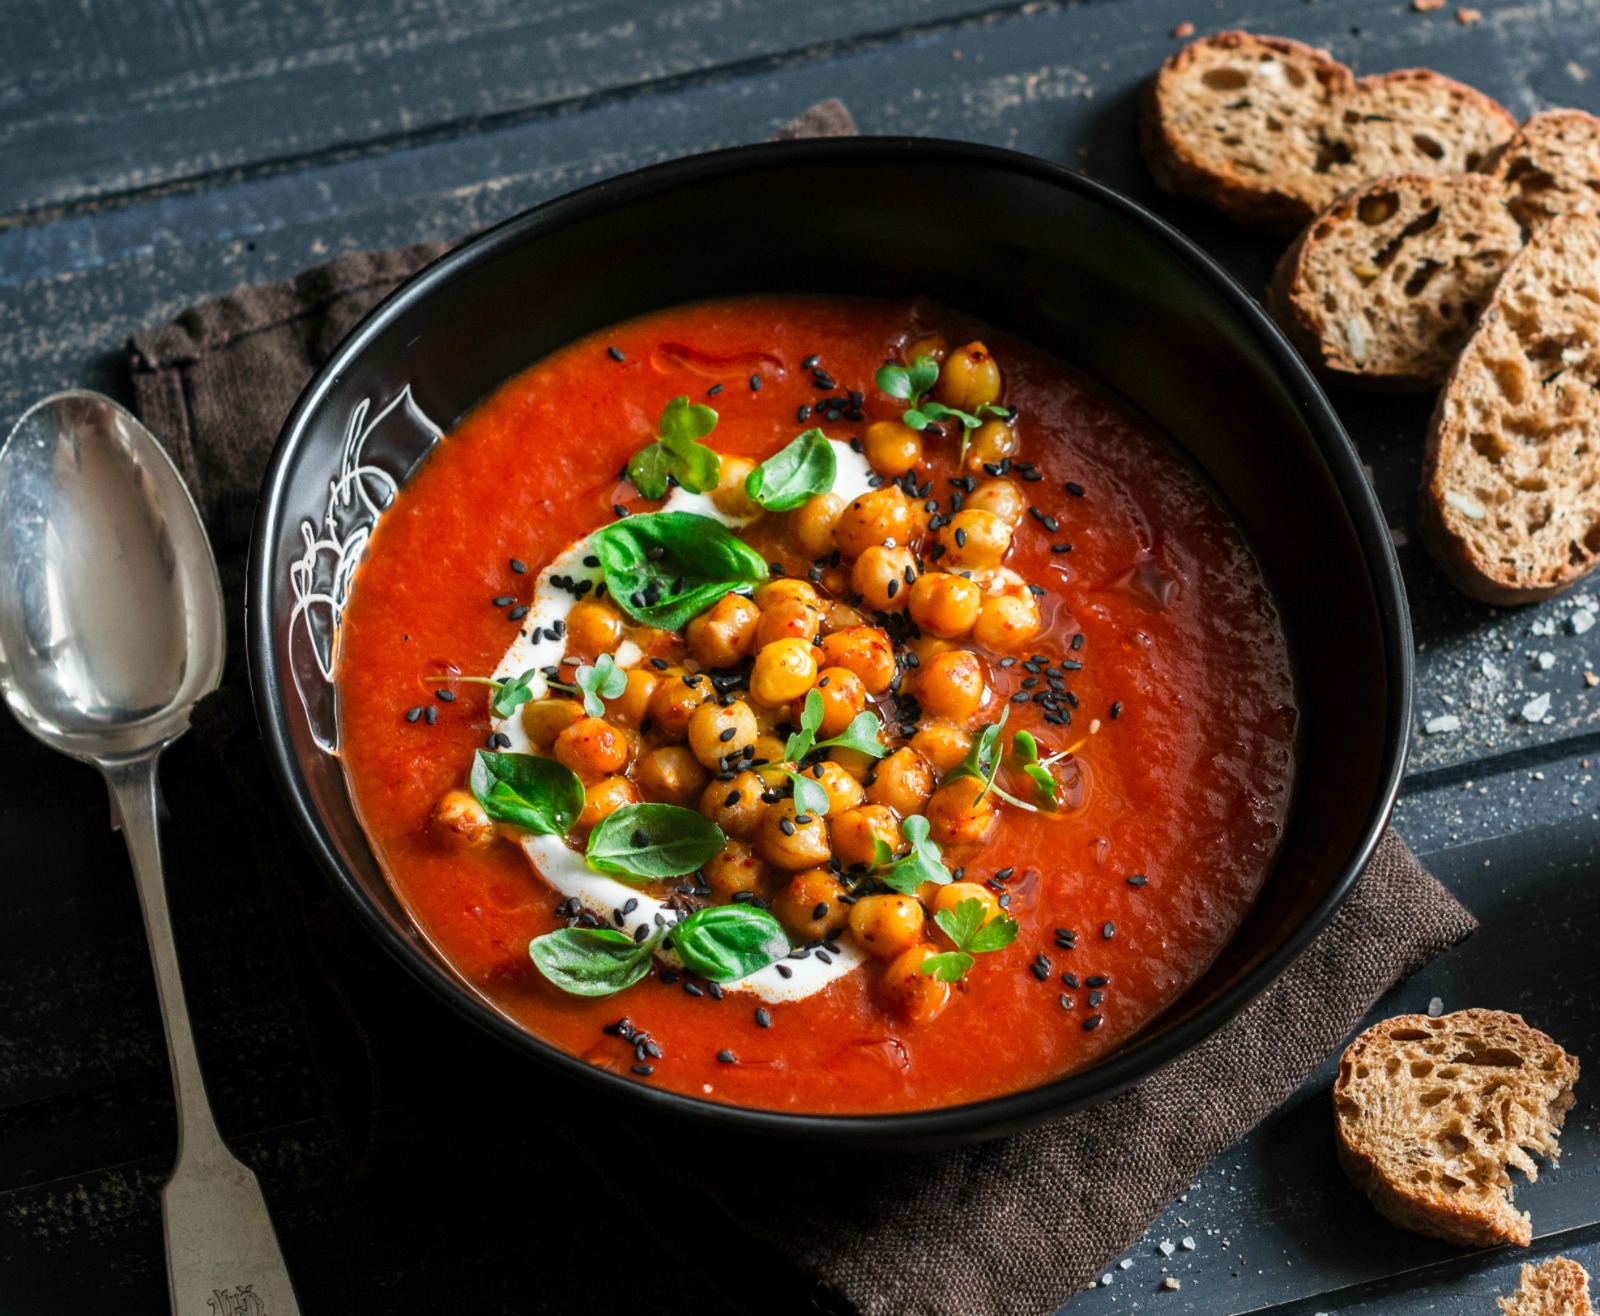 Hands down, this delicious vegan tomato soup made with fire roasted tomatoes and topped with roasted chickpeas is the best tomato soup you'll ever have. (#vegan) ordinaryvegan.net